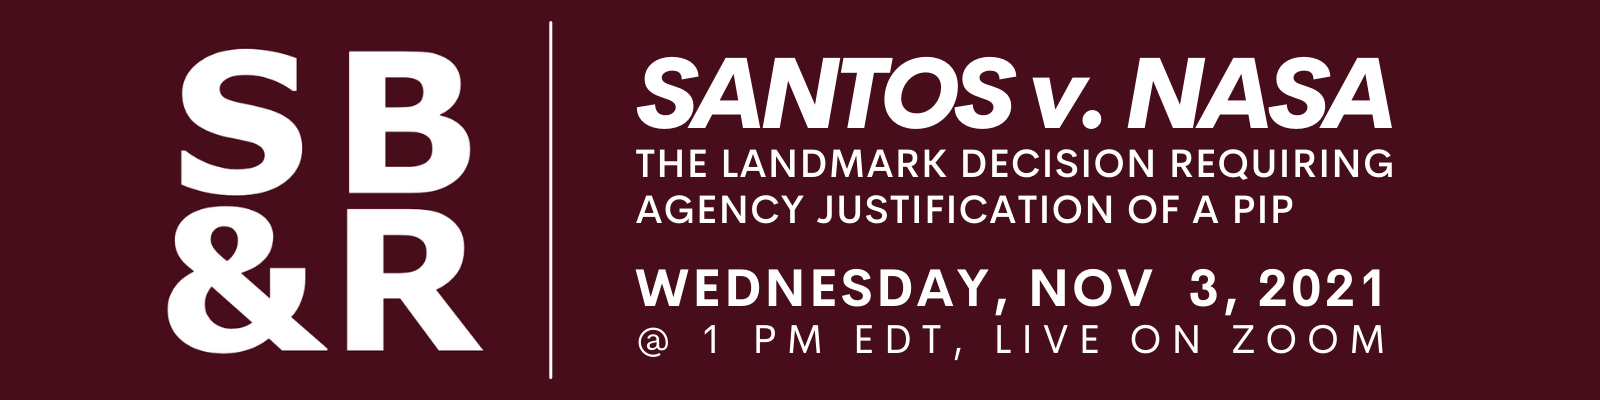 Inside Santos Landmark Decision Requiring Agency Justification Of A Pip Fedmanager